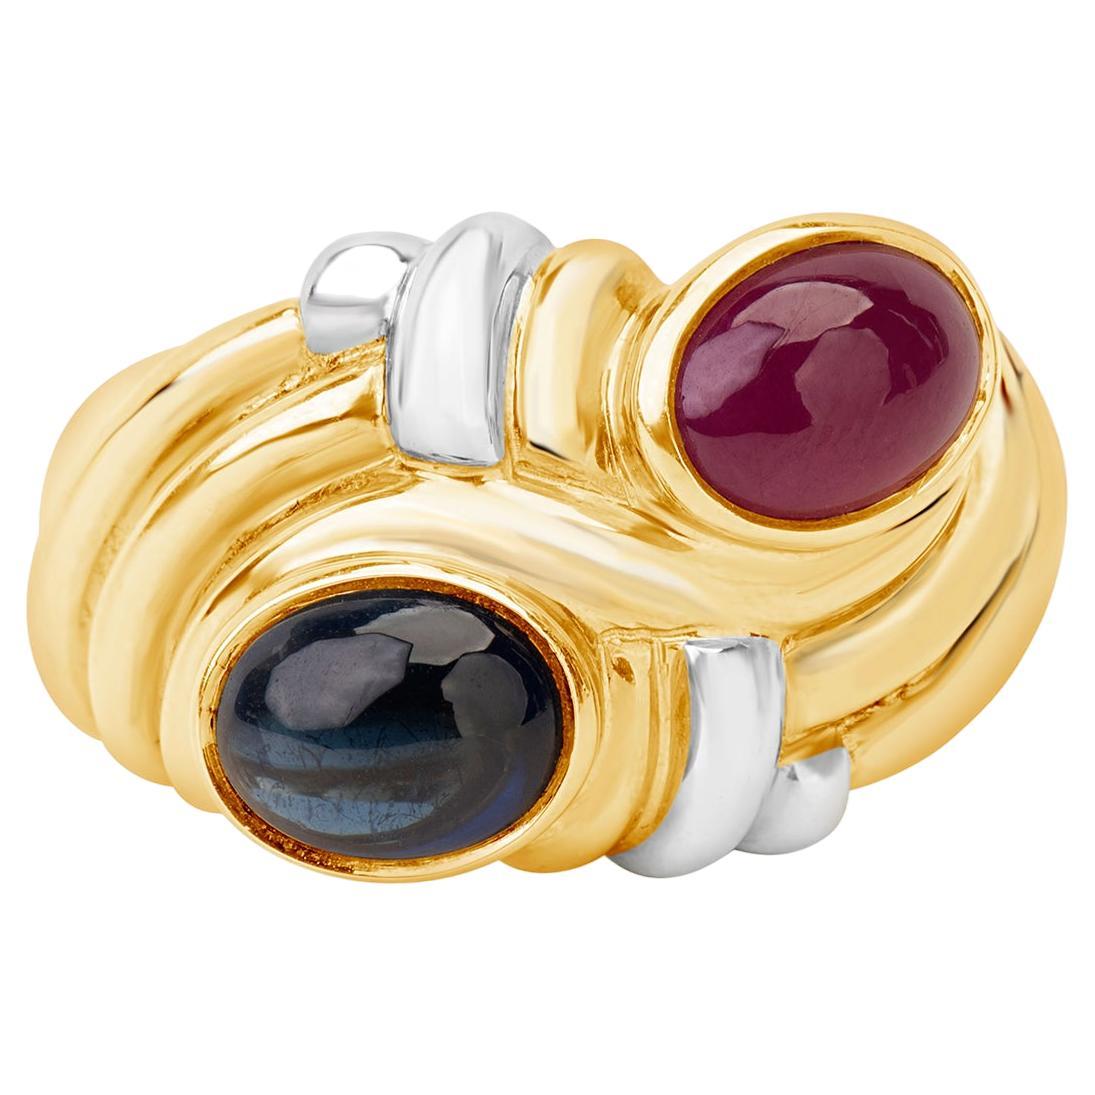 Andreoli Sapphire Ruby 18 Karat Two-Tone Gold Ring